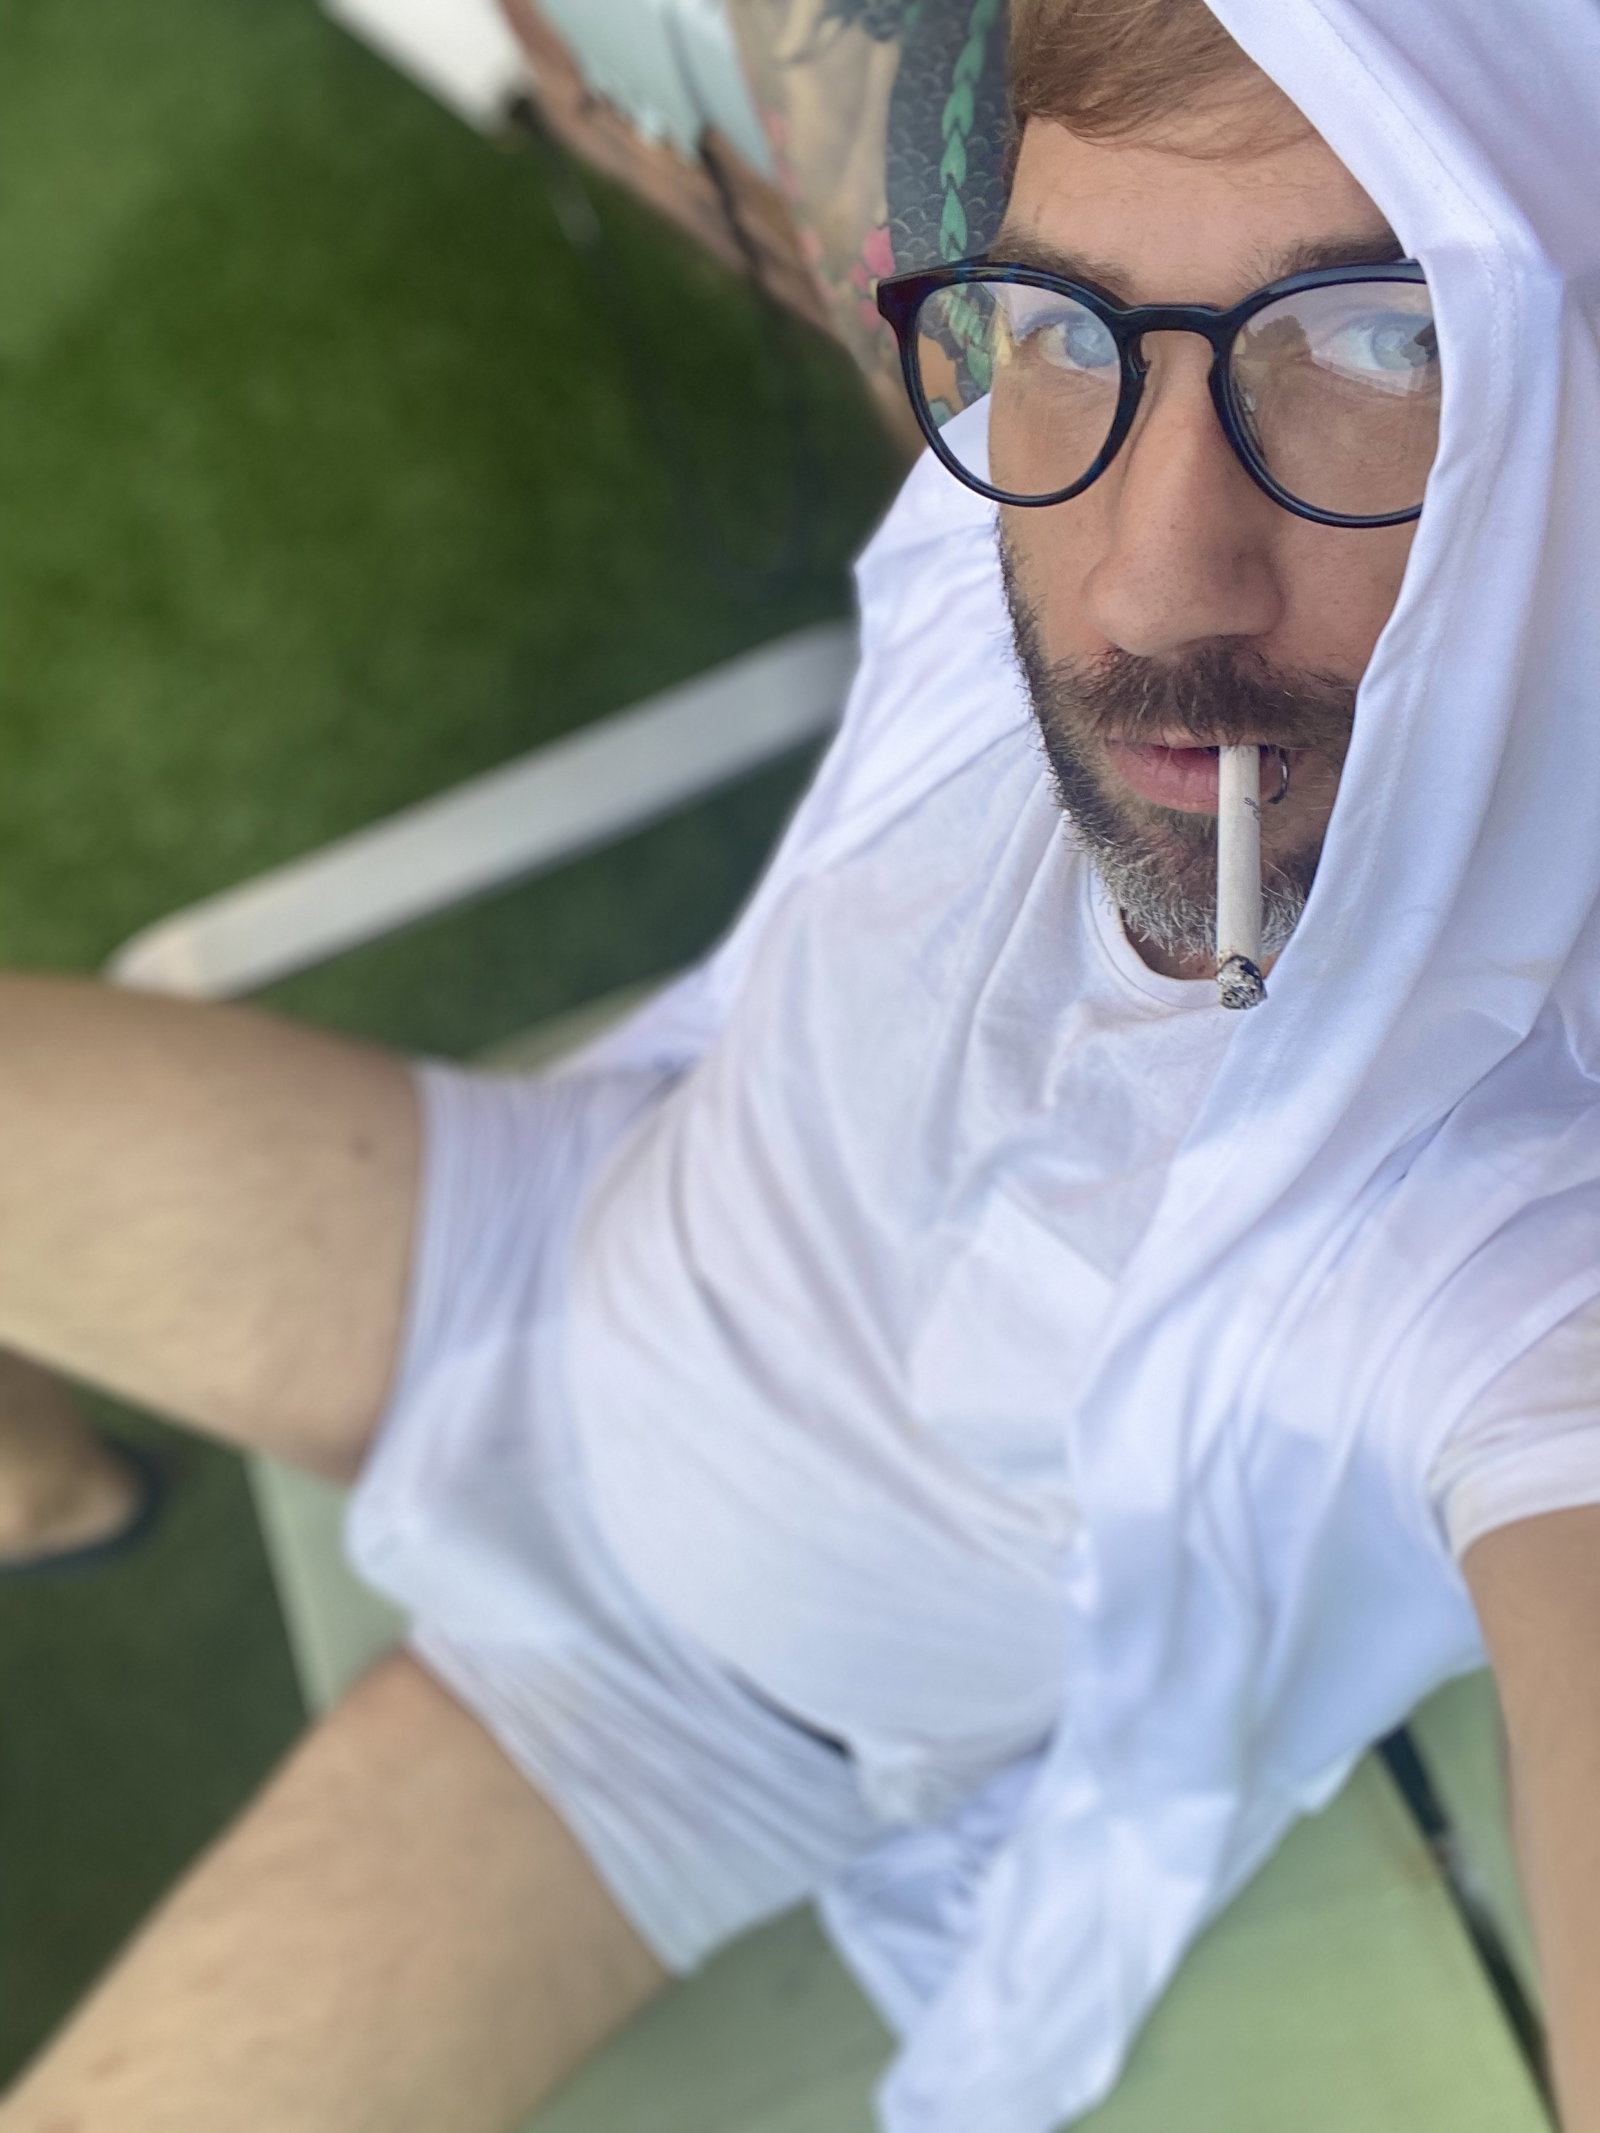 Watch the Photo by ri0 entmt with the username @ri0entmt, who is a star user, posted on June 2, 2020. The post is about the topic GayExTumblr. and the text says 'I am LIVE right now! Go to my page and click the "JOIN ME LIVE" button! justfor.fans/Ri0_Ent not cum in over 19 days - don’t miss this totally free show! #gayporn #gaypornstar #xxxgay #gaysex #bareback #gayvid #NSFW #gayxxx #grindr #gayhot 
#gaypornvids..'